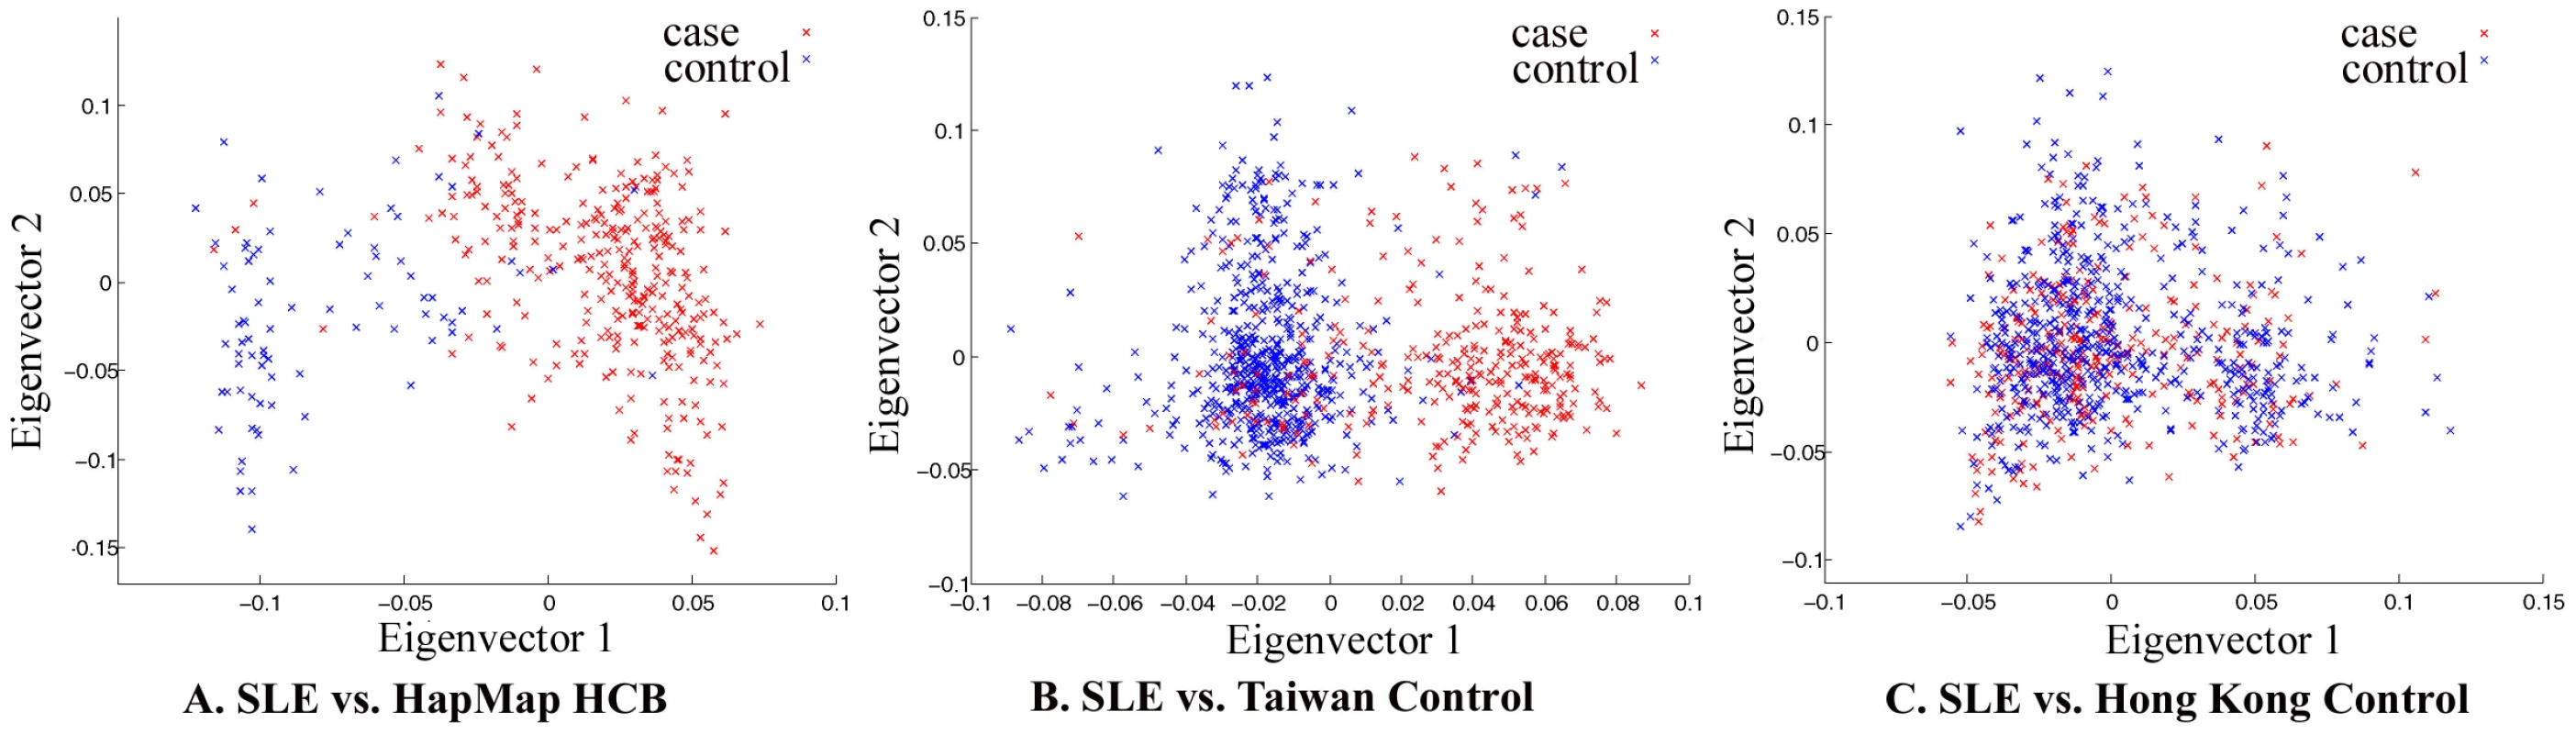 Principal component analysis of Chinese samples collected in Hong Kong, Taiwan, and Beijing.